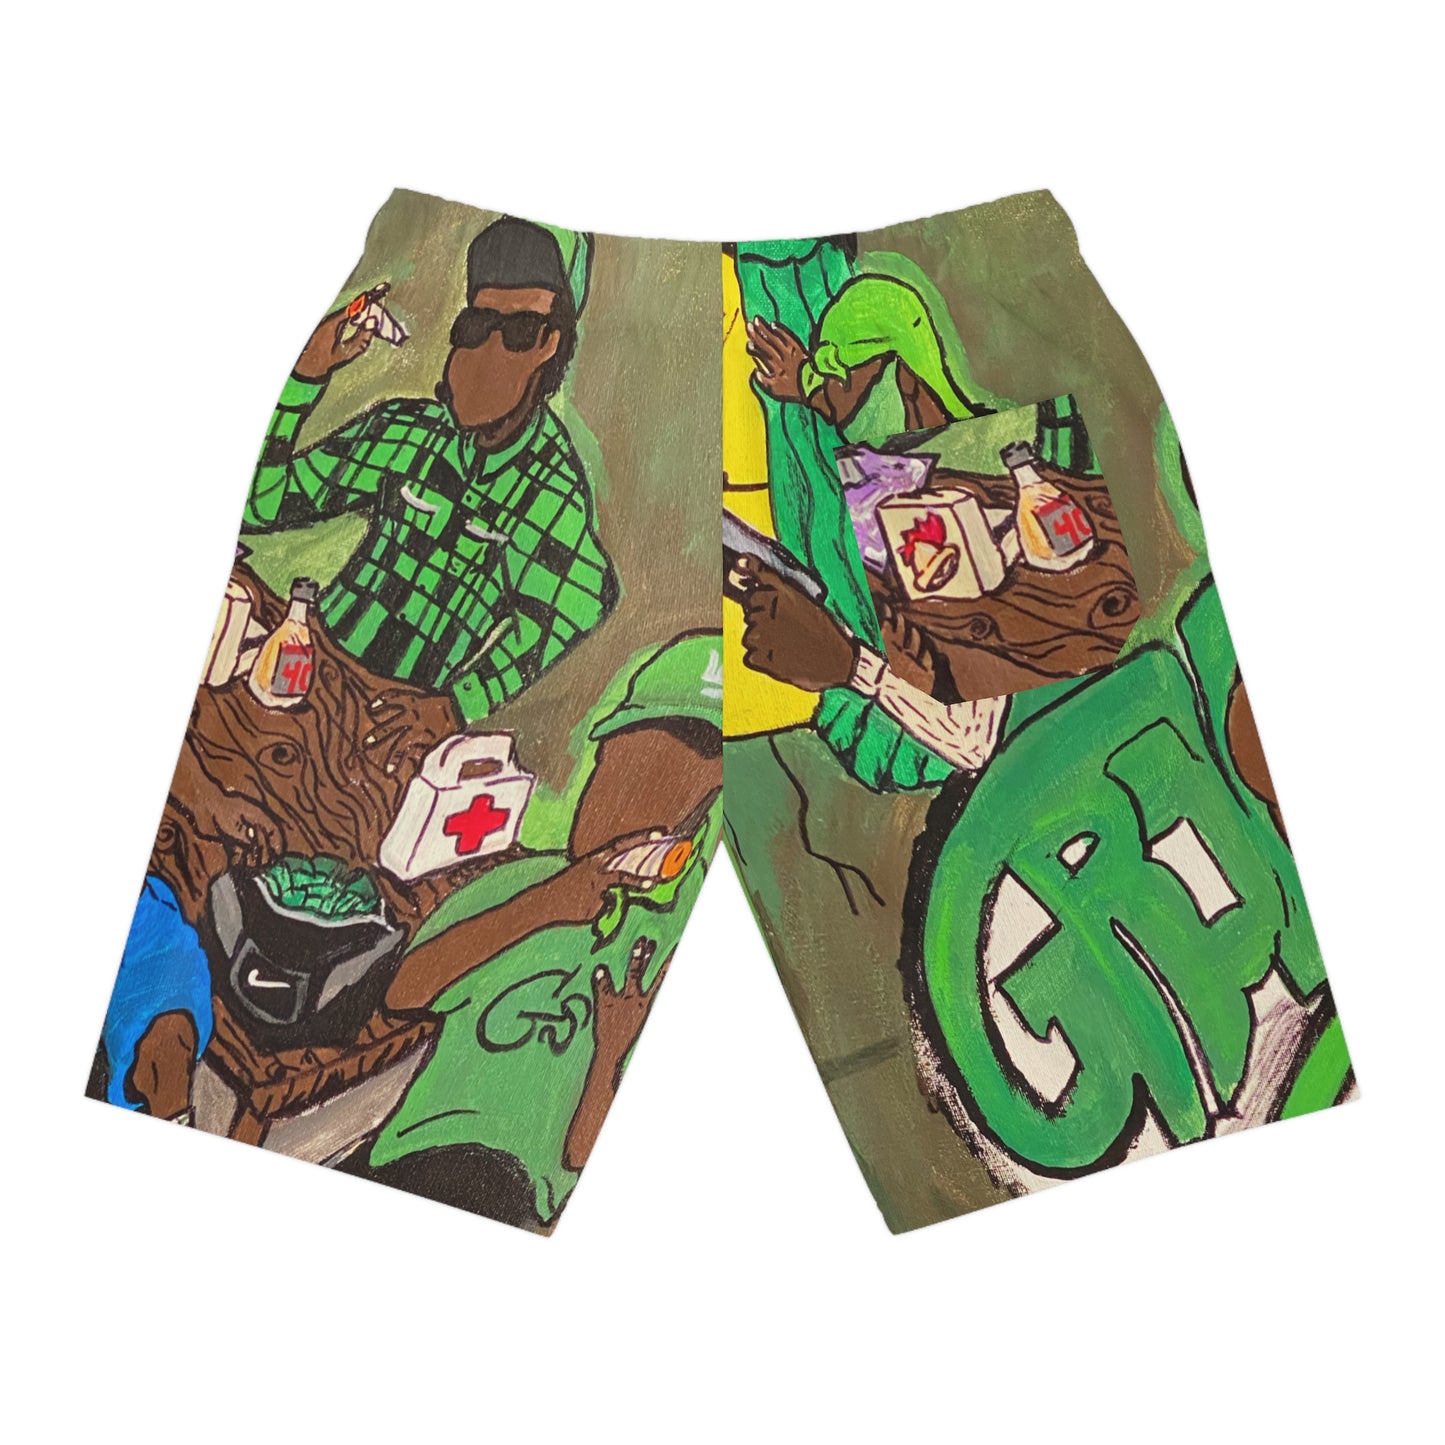 The Grove Shorts